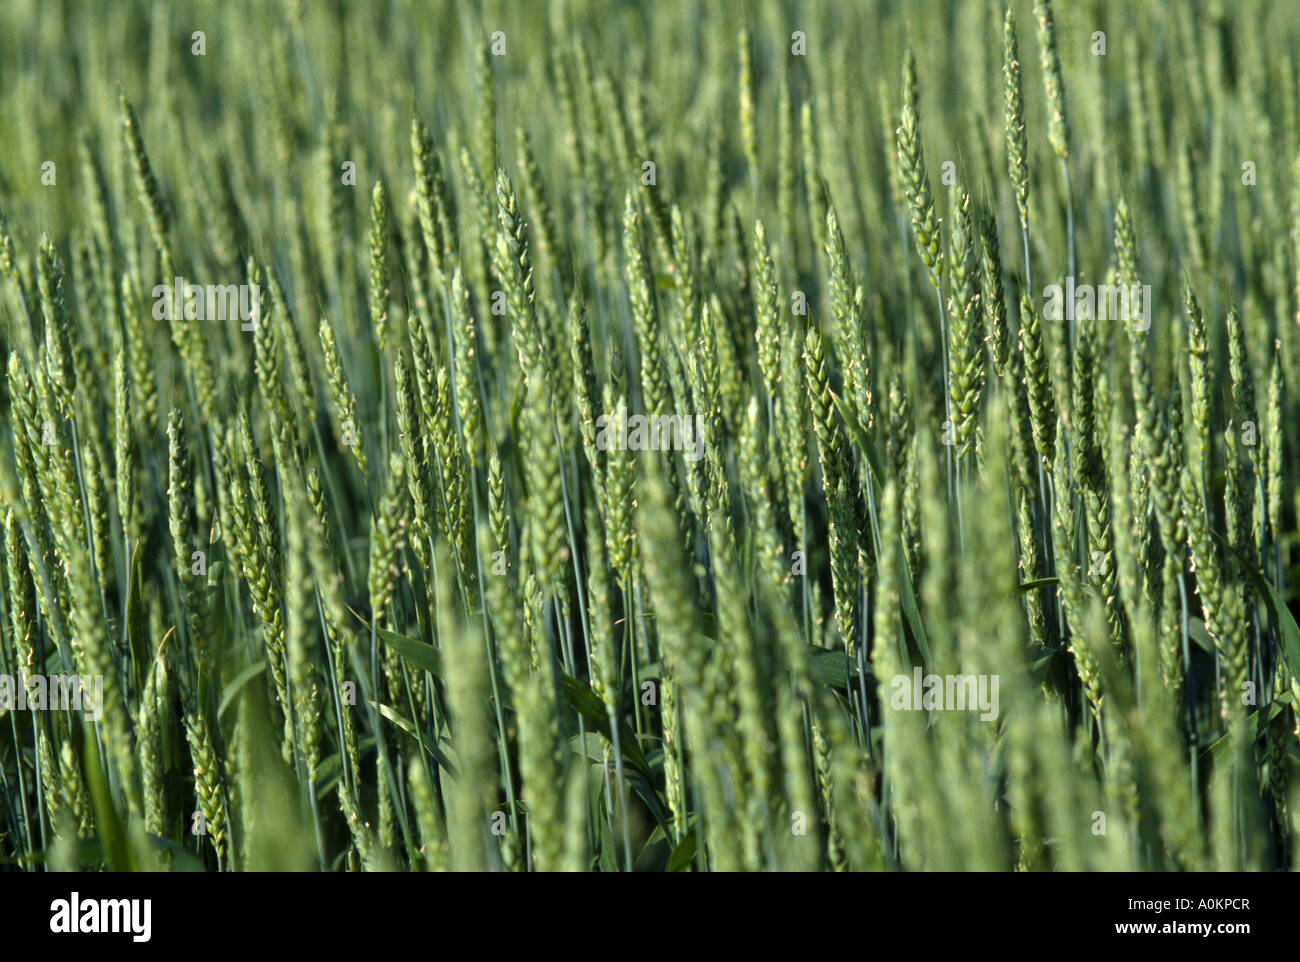 WHEAT HEADS JUST PAST BOOT STAGE ILLINOIS Stock Photo - Alamy